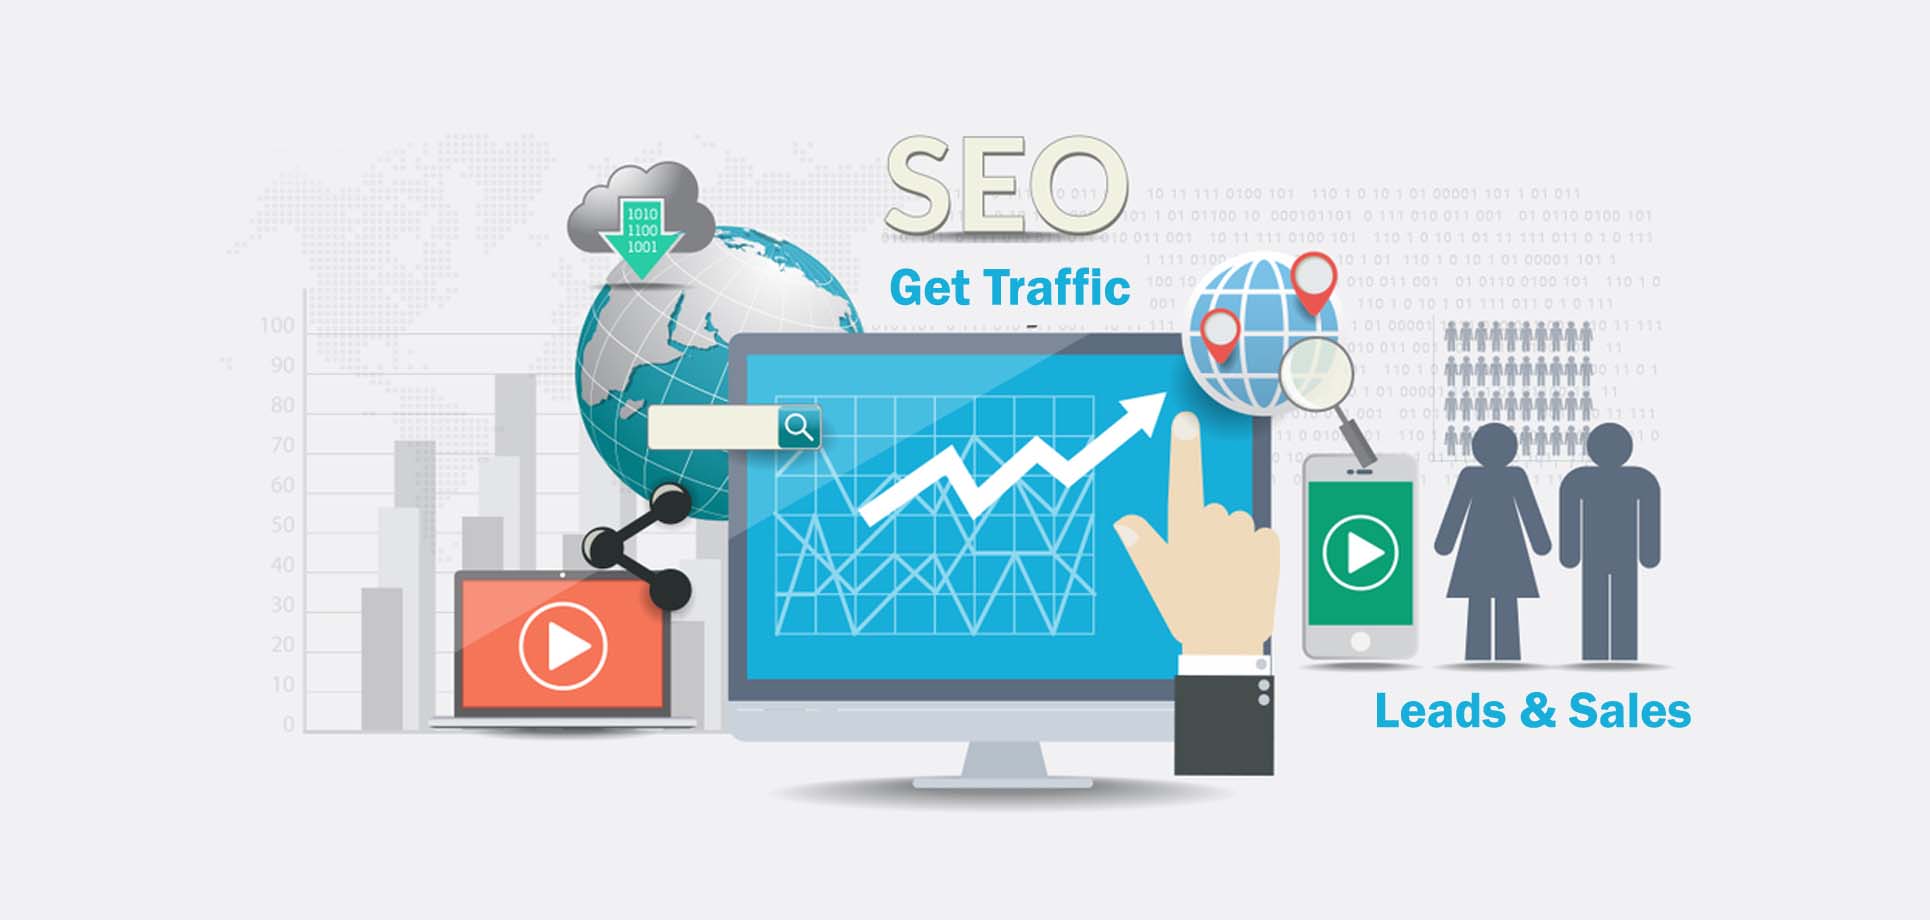 Expert SEO Services Provider 